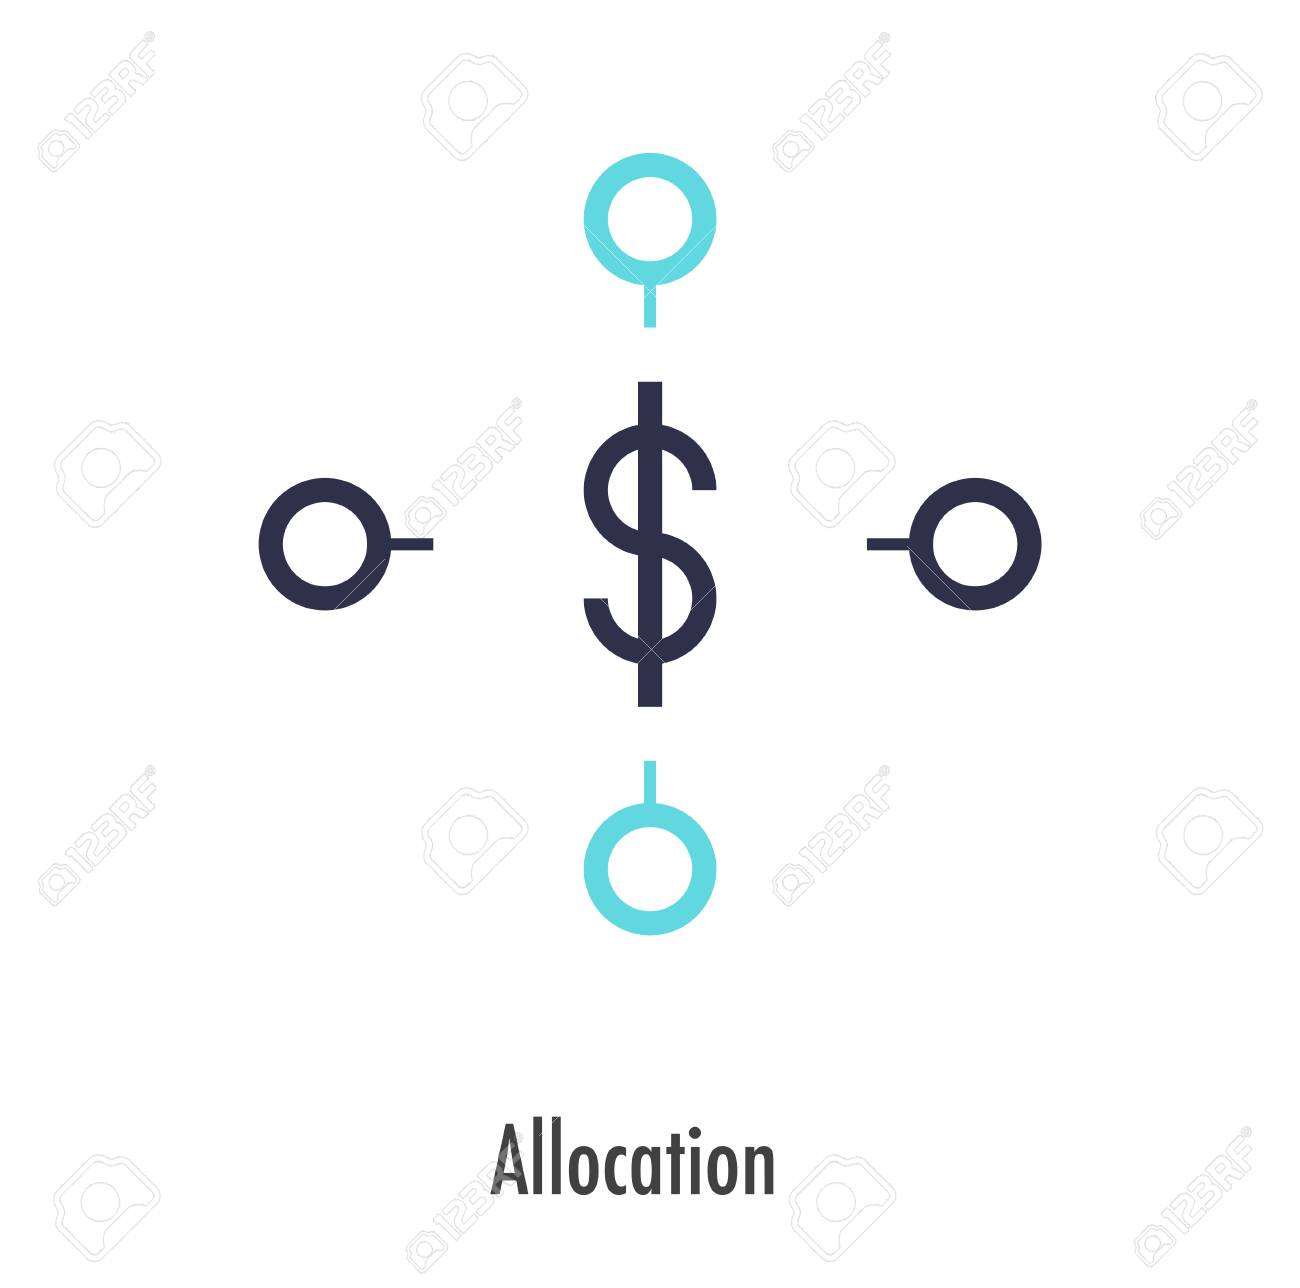 Public Allocation Svg Png Icon Free Download (#396024 